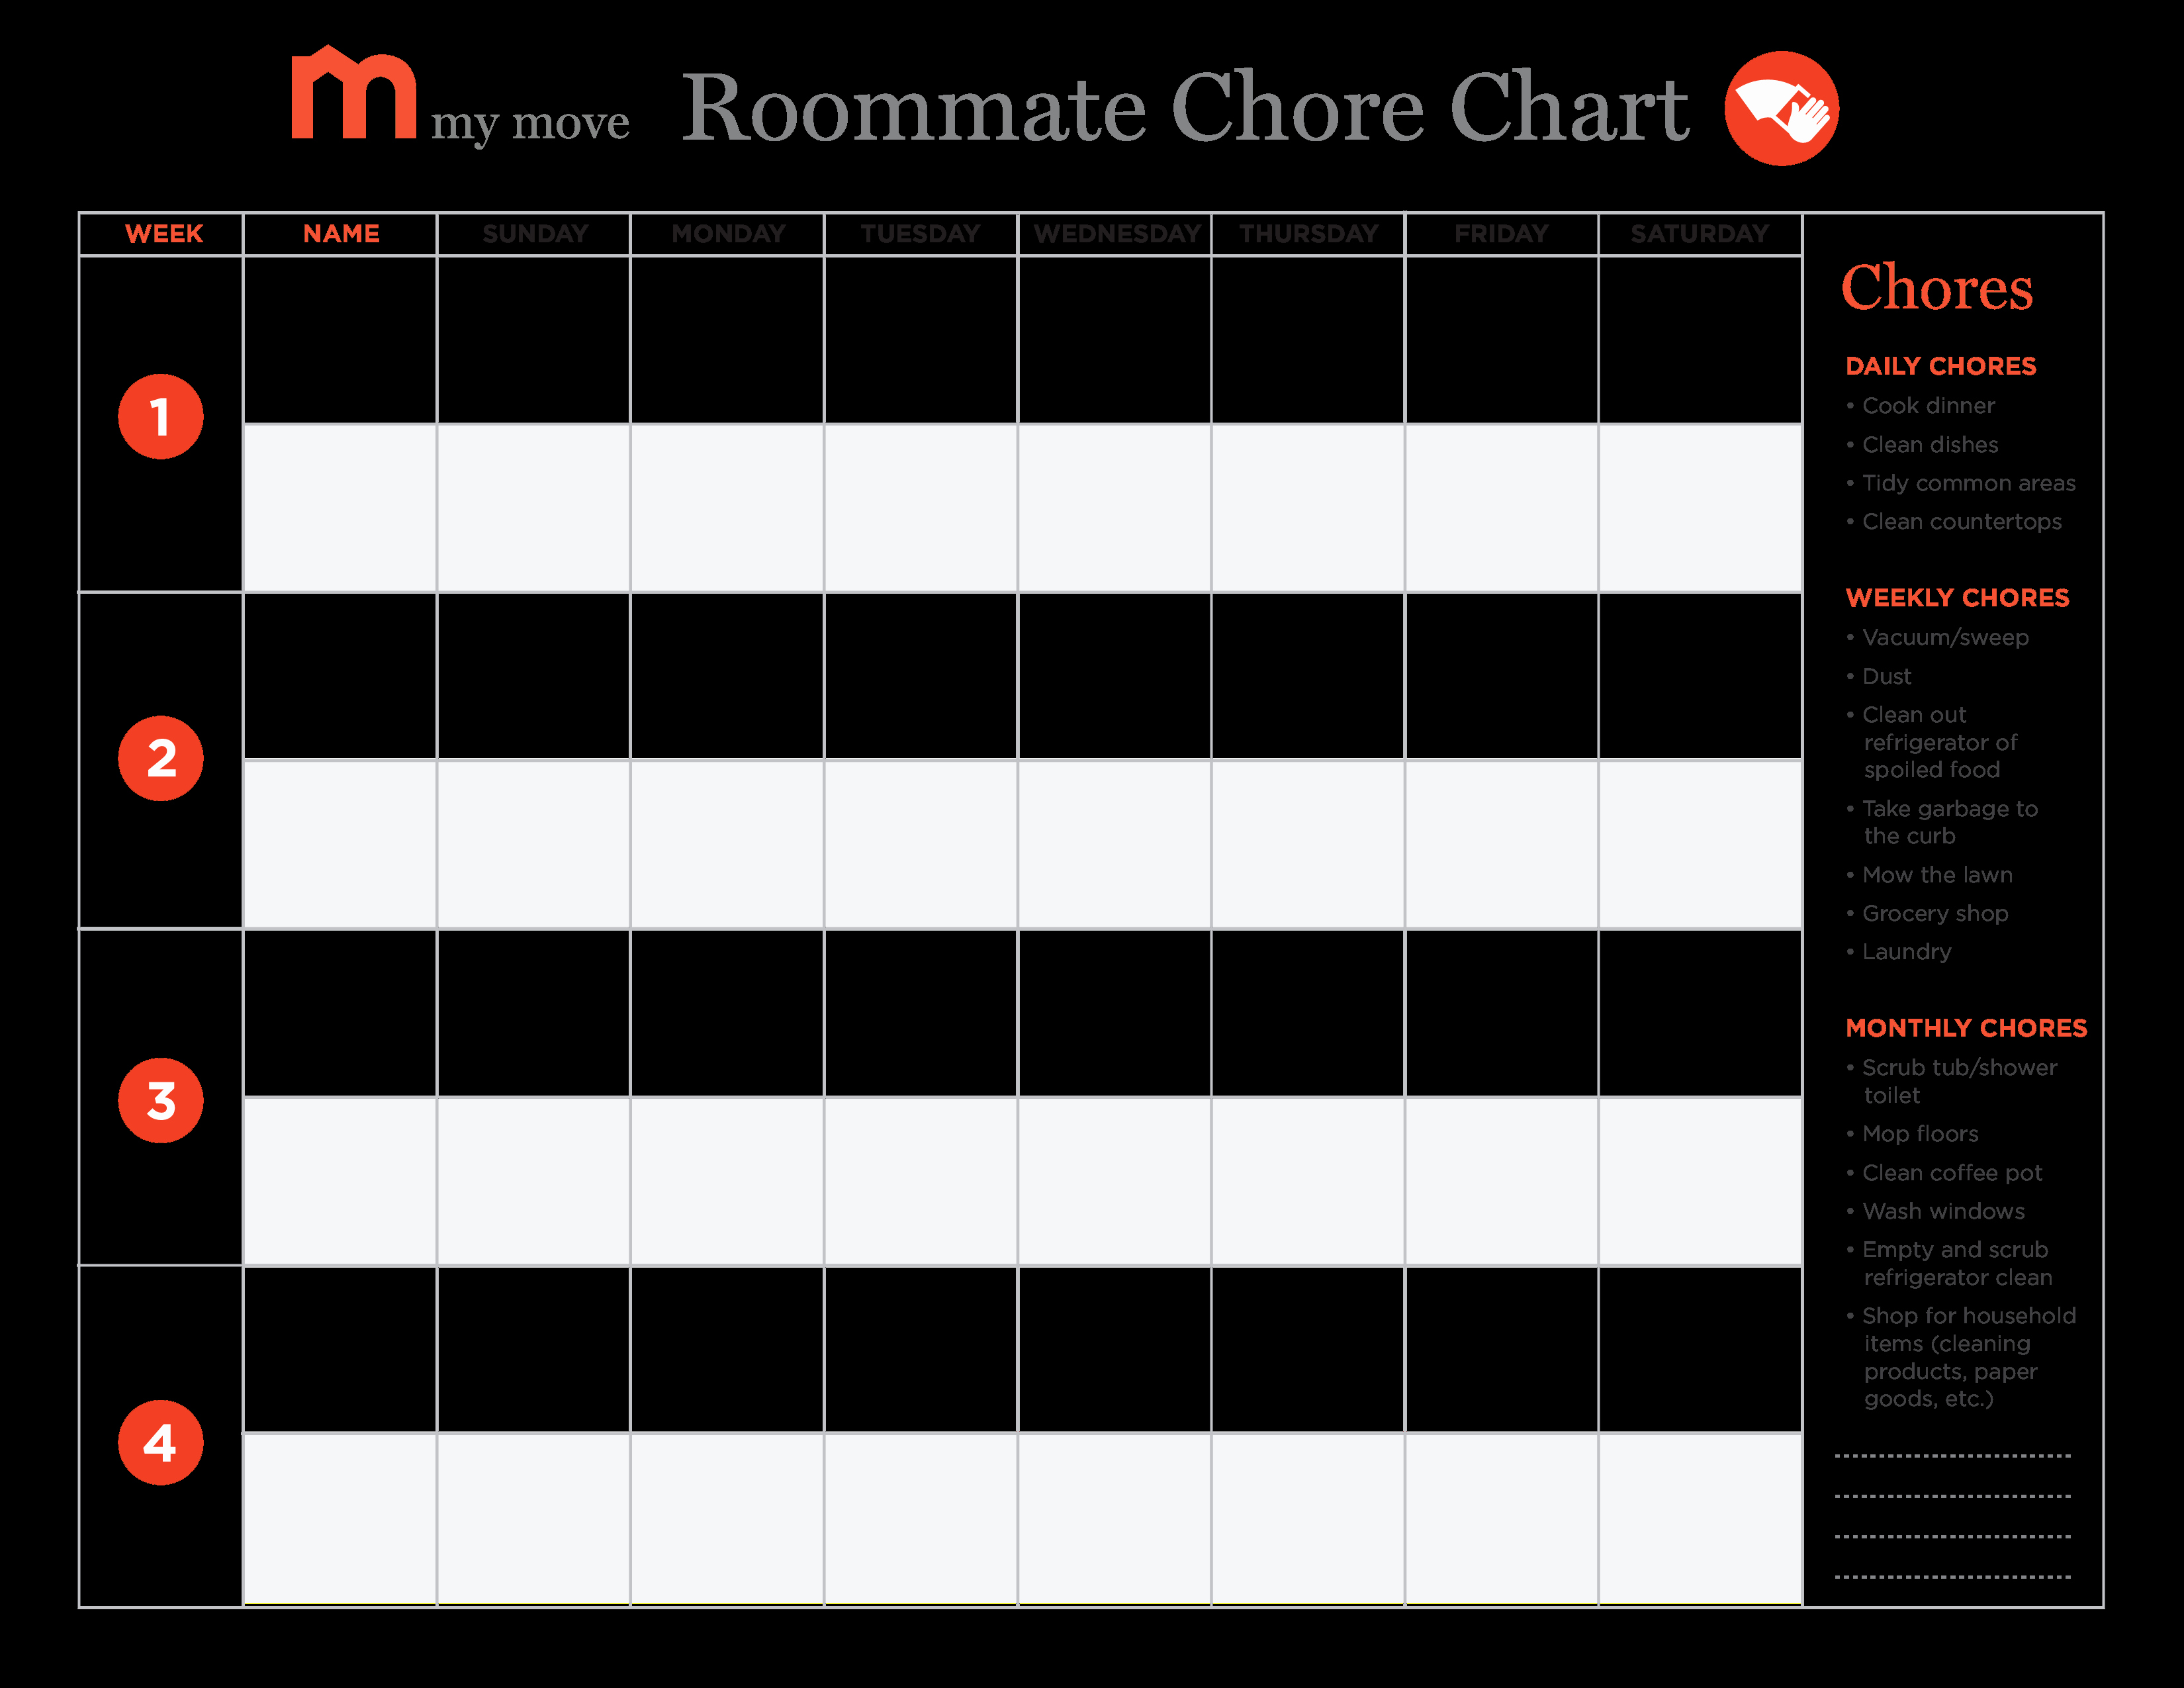 Roommate Chore Chart Template Awesome Free Roommate Chore Chart